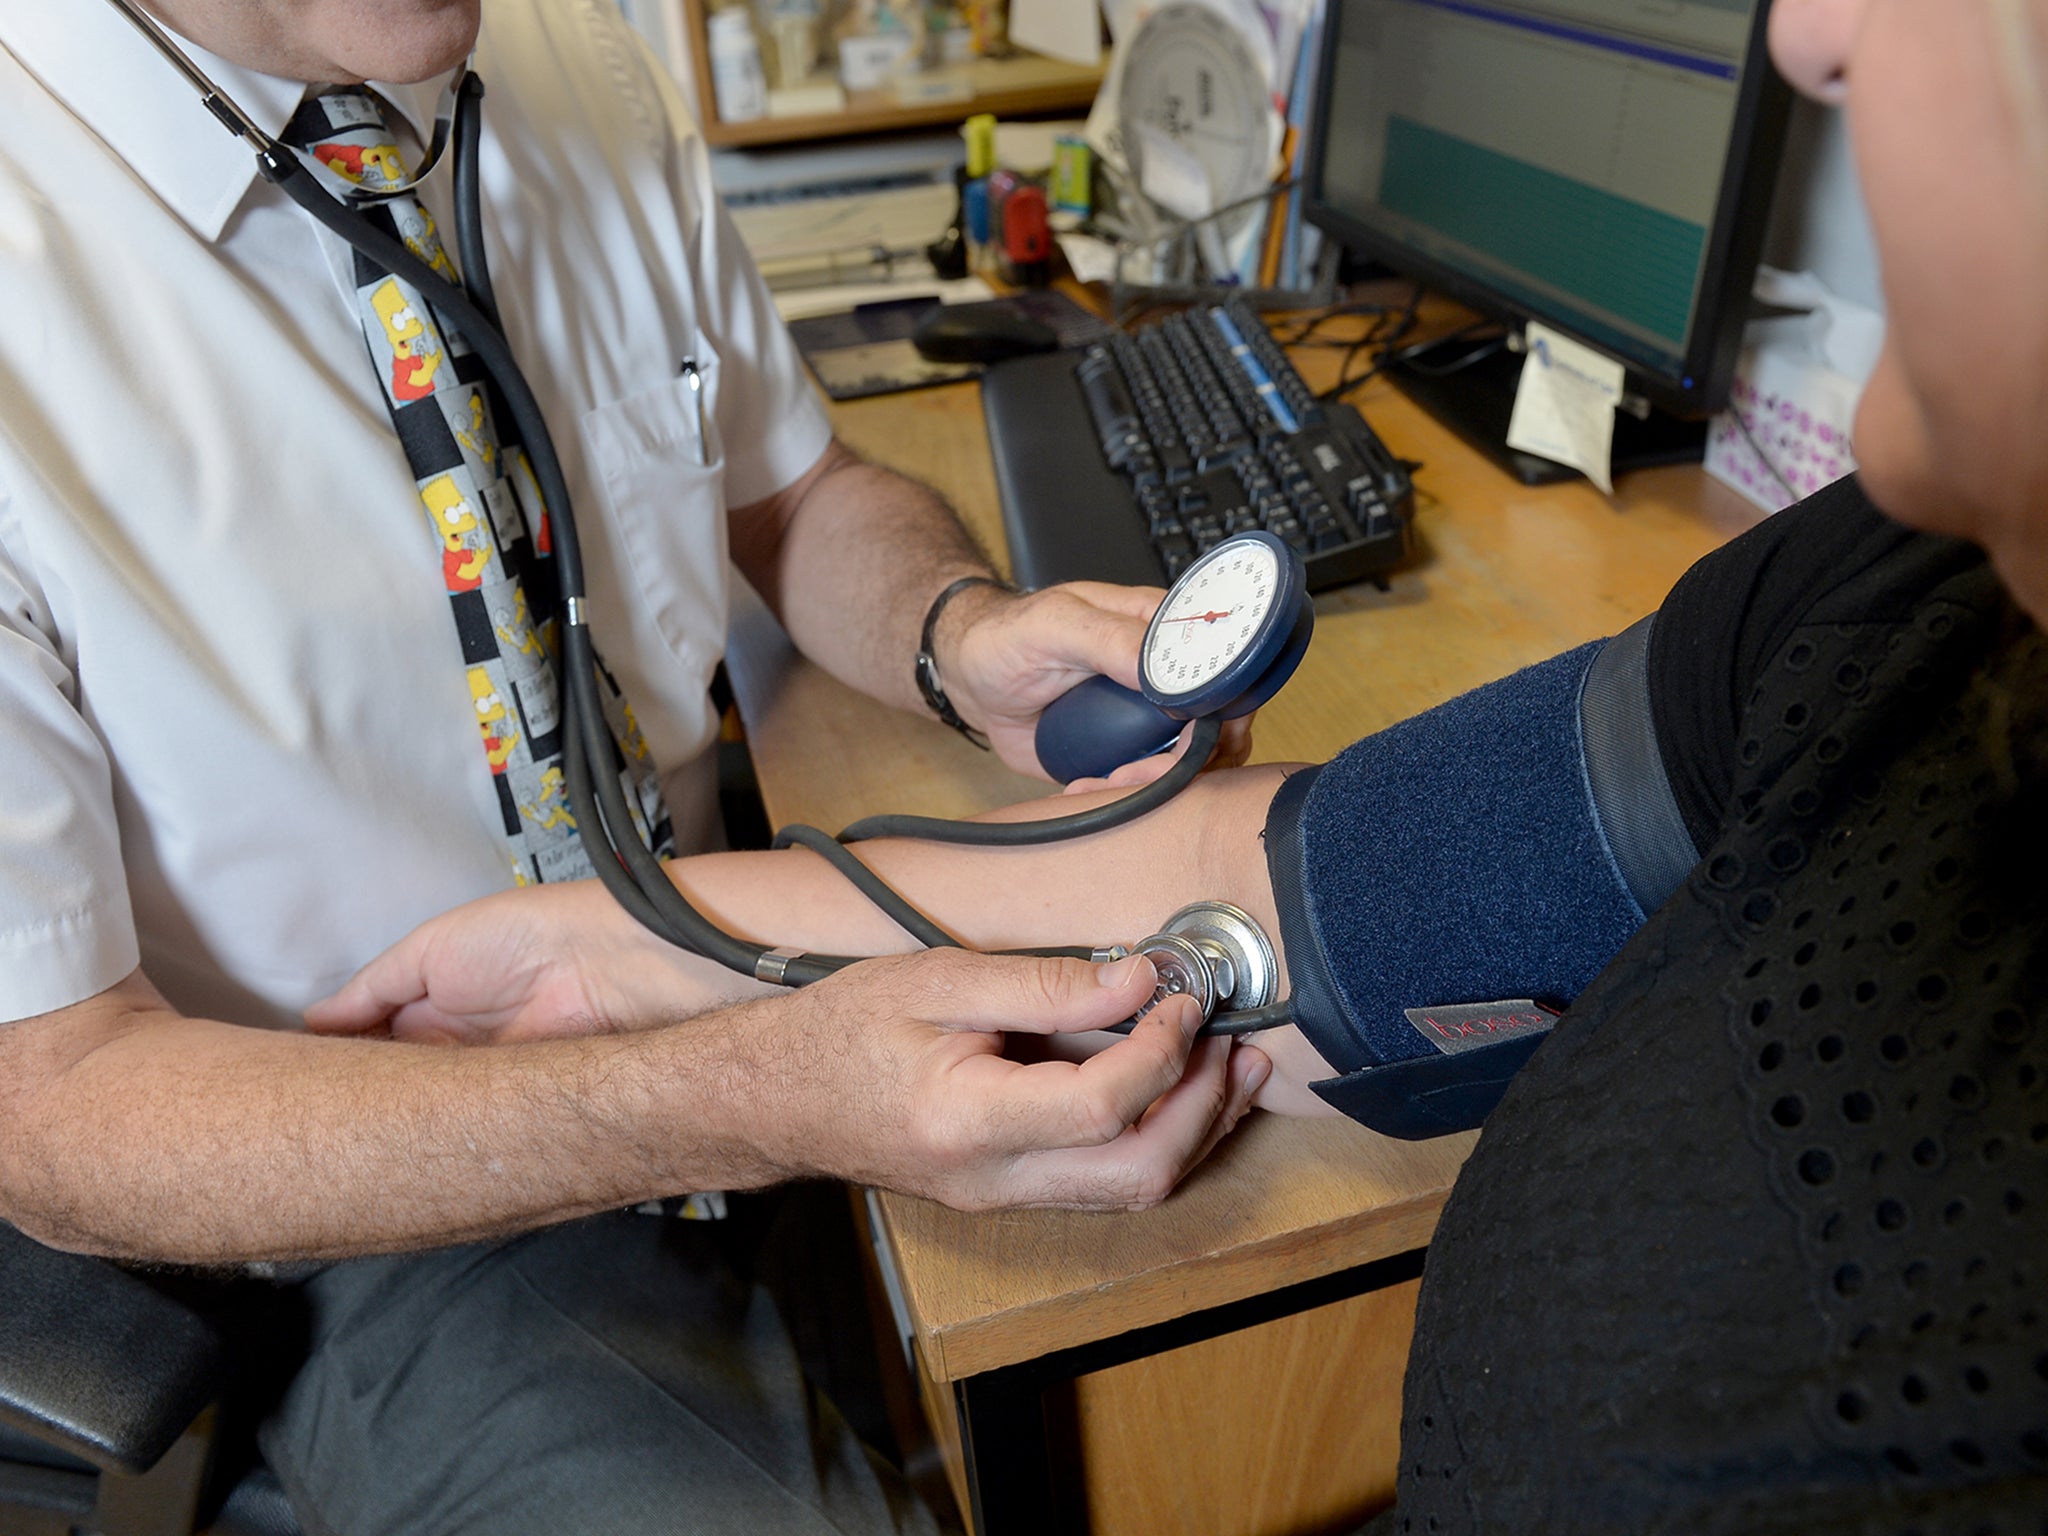 BMA warning over plan for GP practices to become 'lead employer